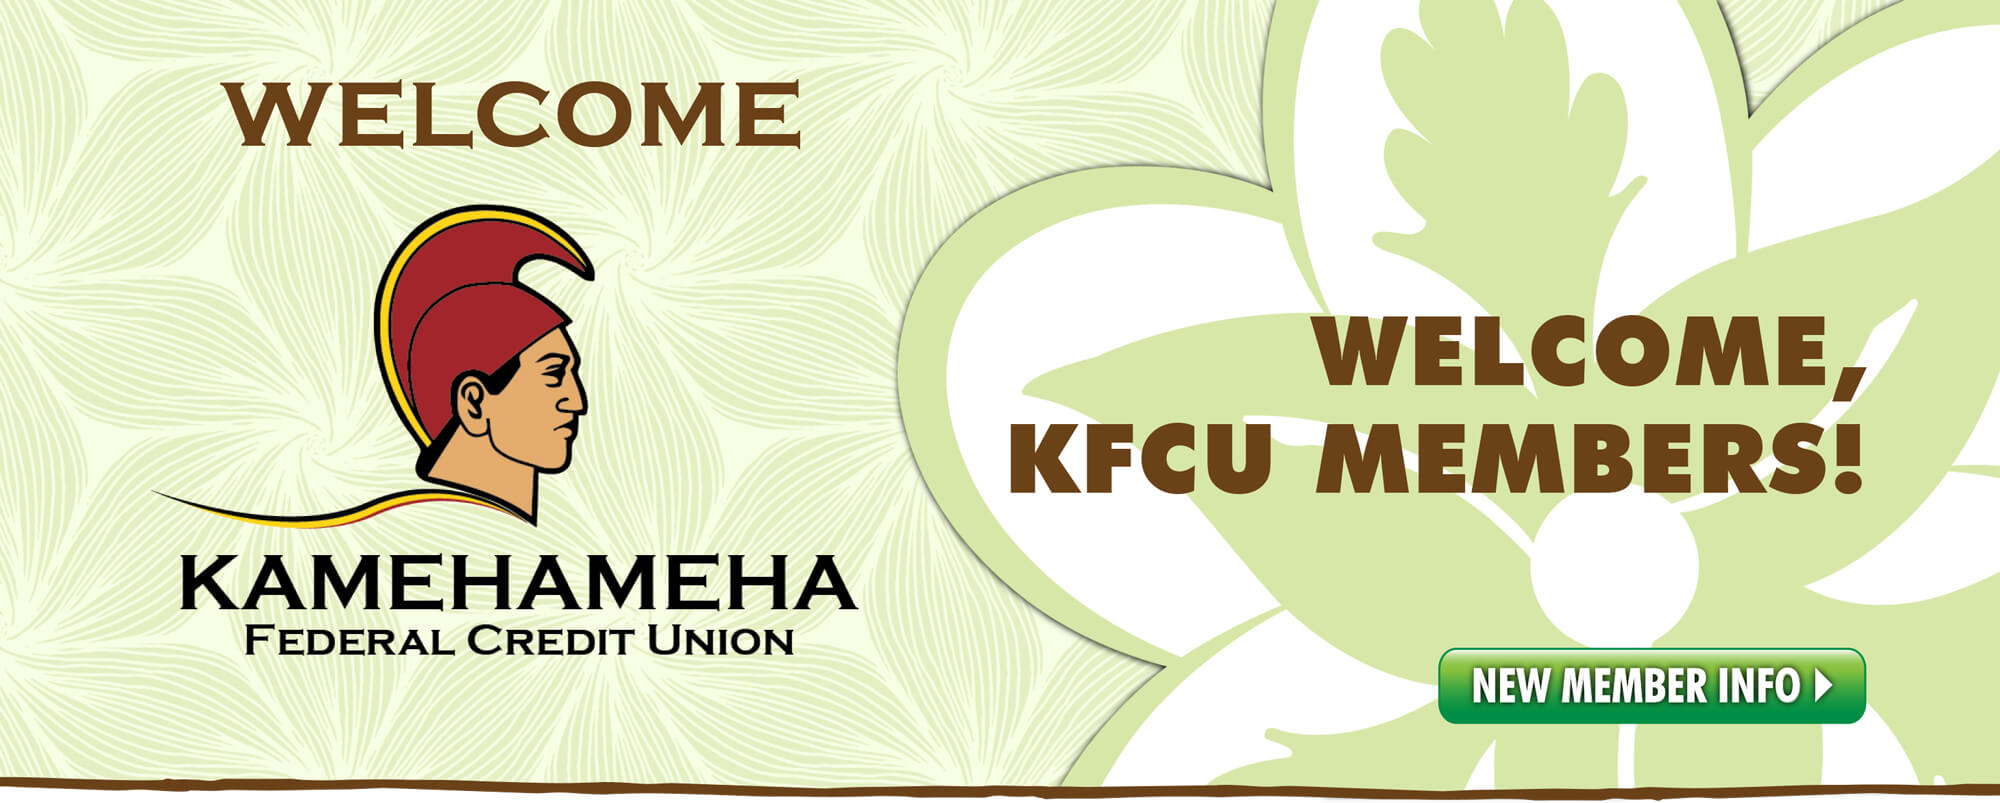 Welcome, KFCU members!  Click here for new member information.